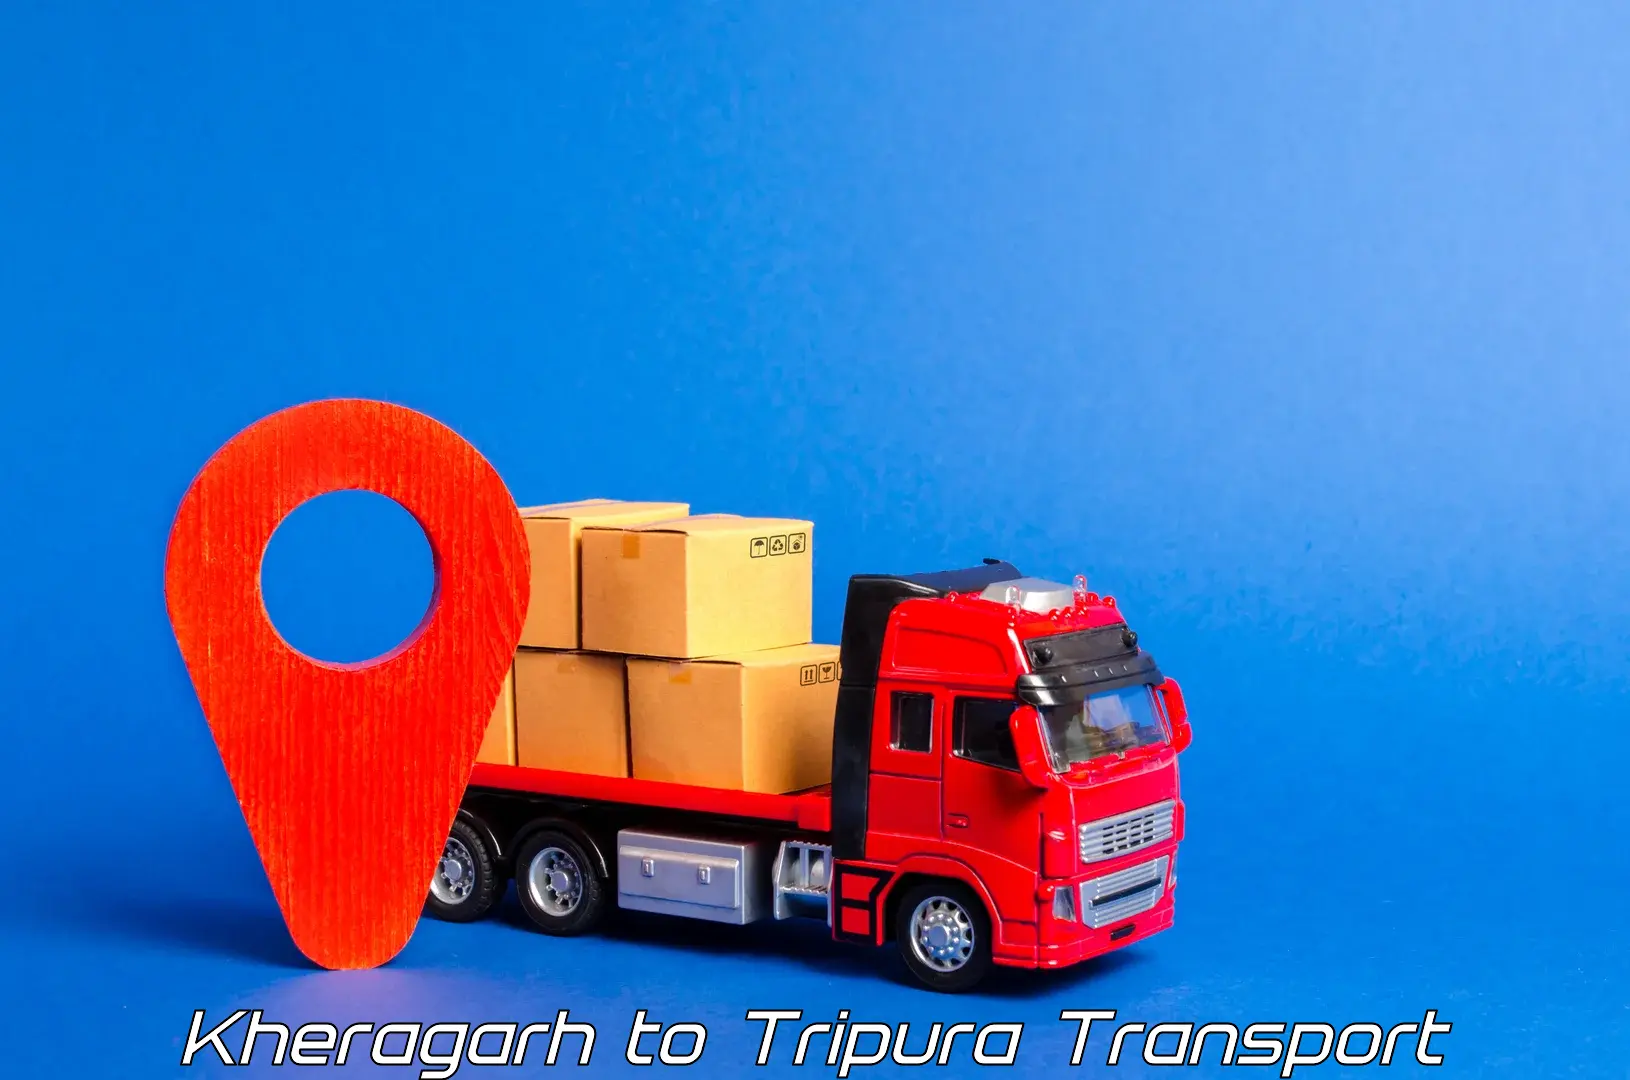 Transport bike from one state to another in Kheragarh to South Tripura